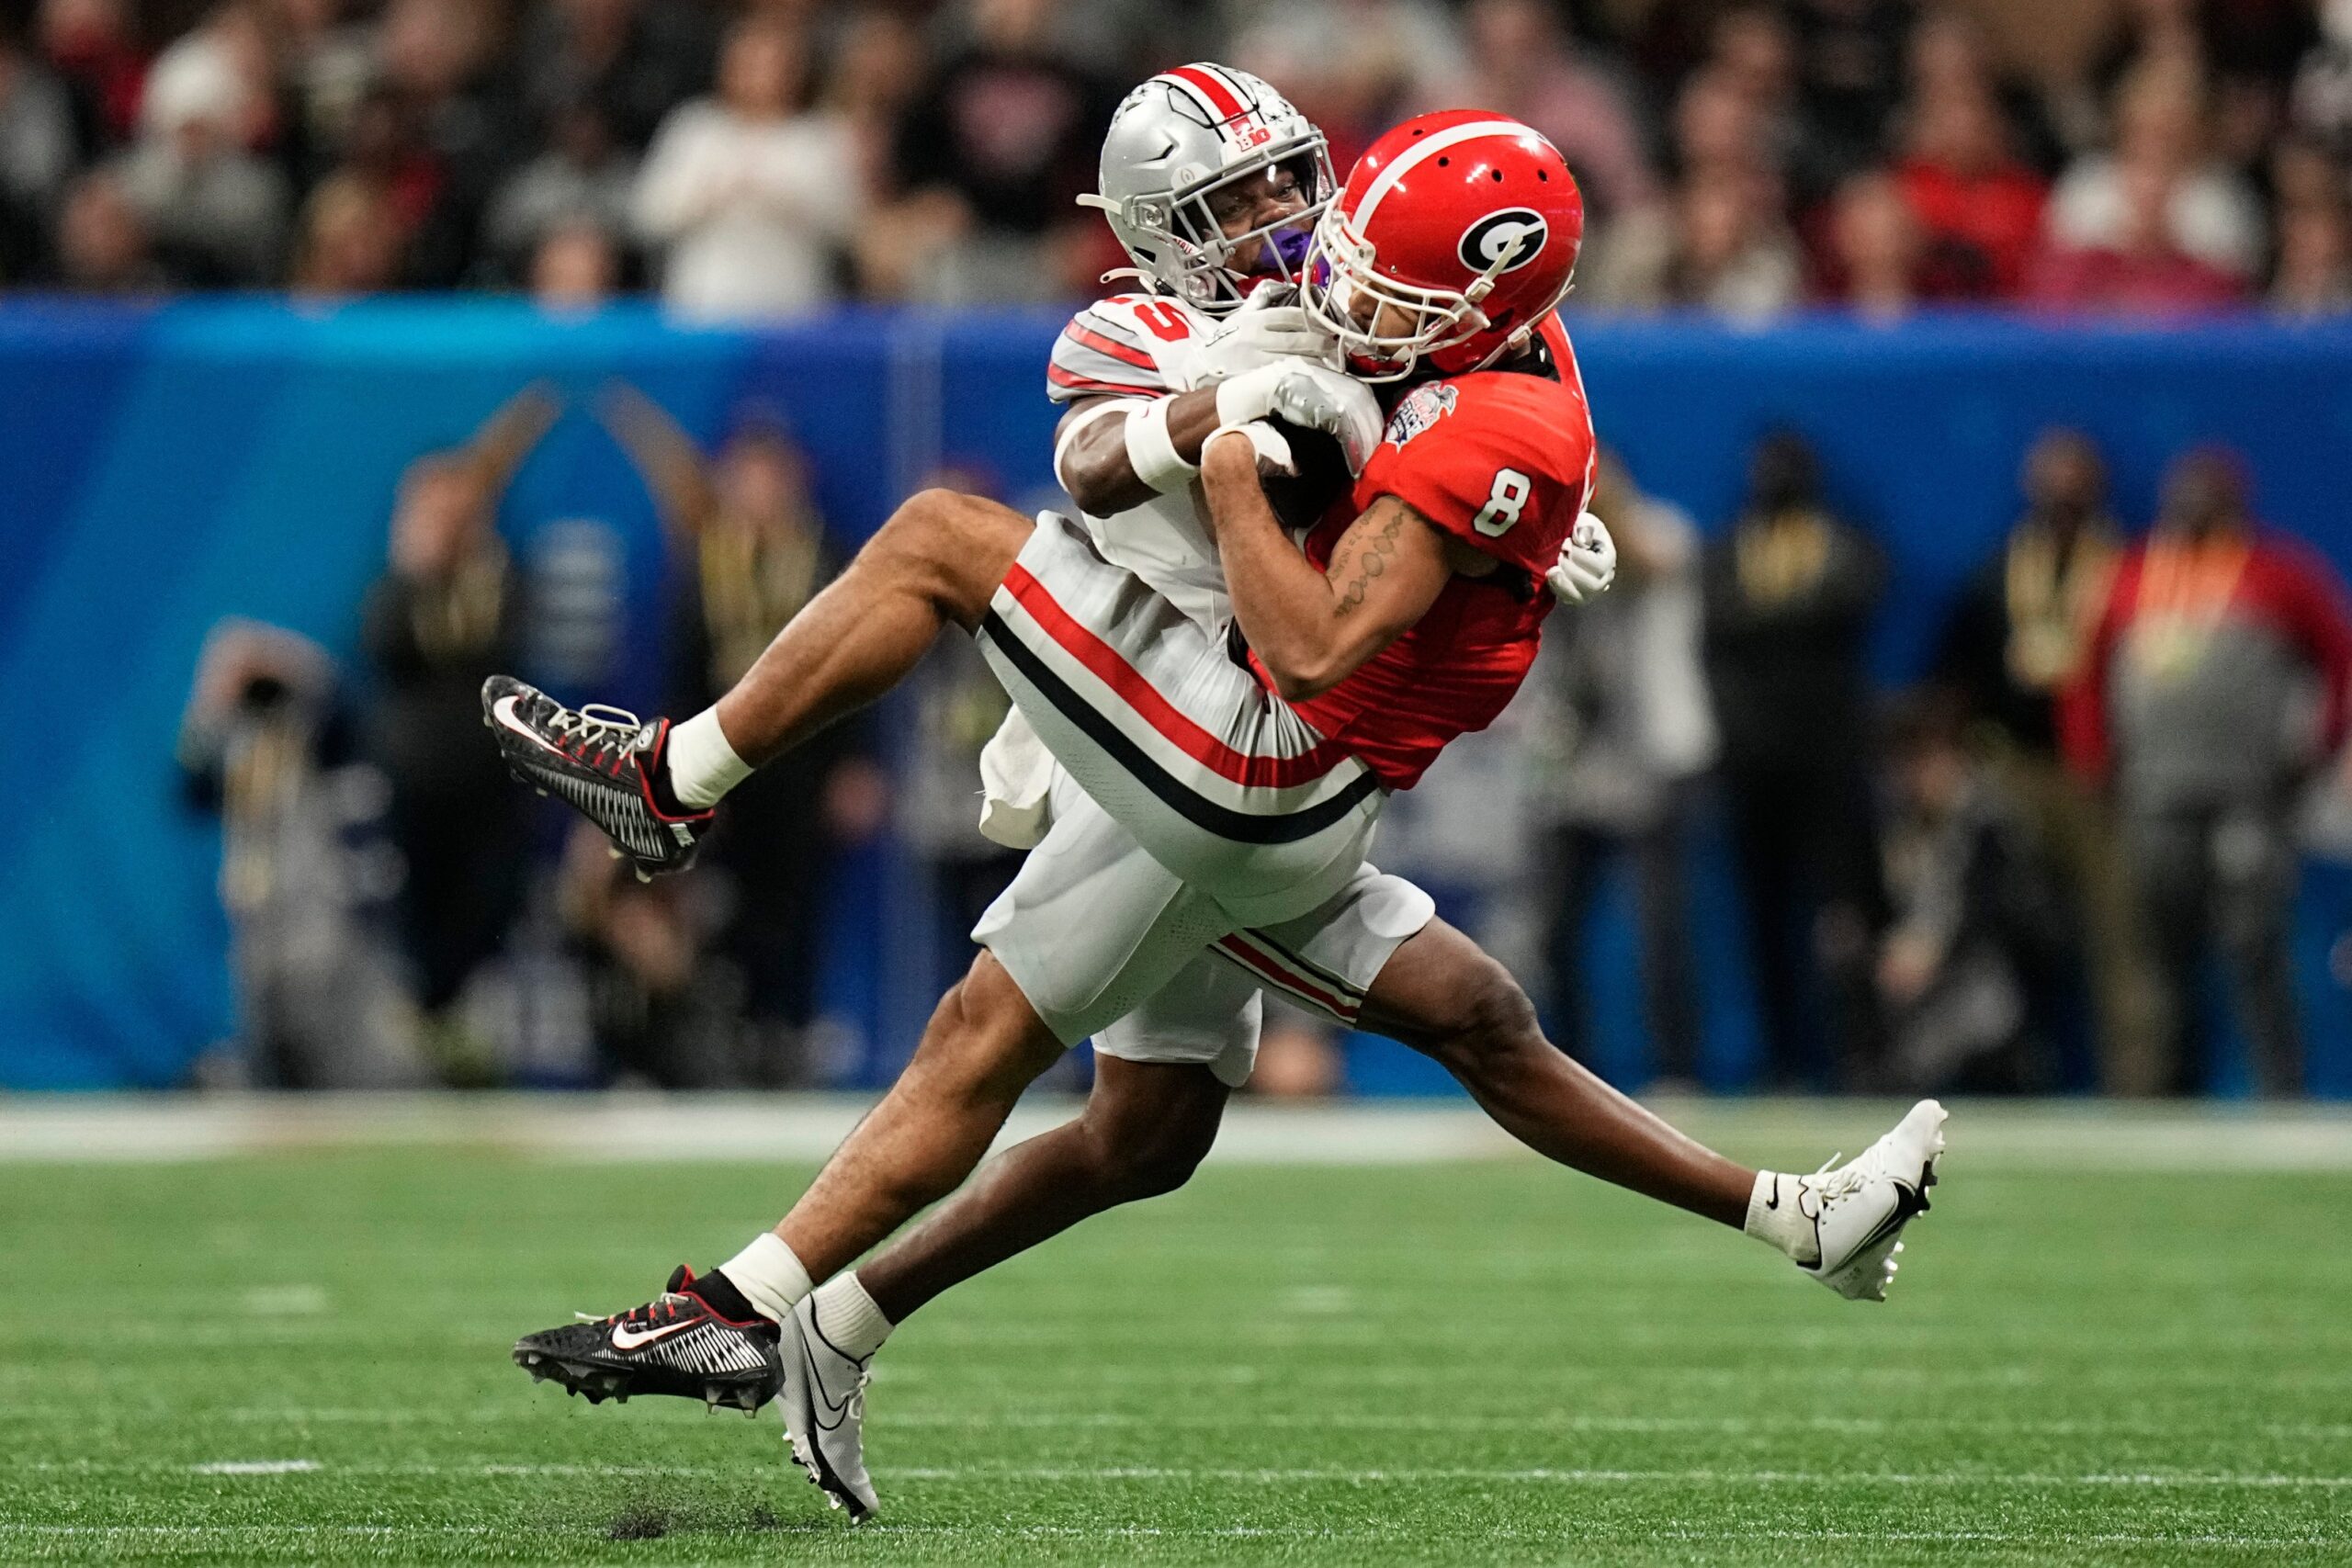 Georgia Bulldogs wide receiver Dominick Blaylock (8) catches a pass while being defended by Ohio State Buckeyes safety Jaylen Johnson (25) during the first half of the Peach Bowl.